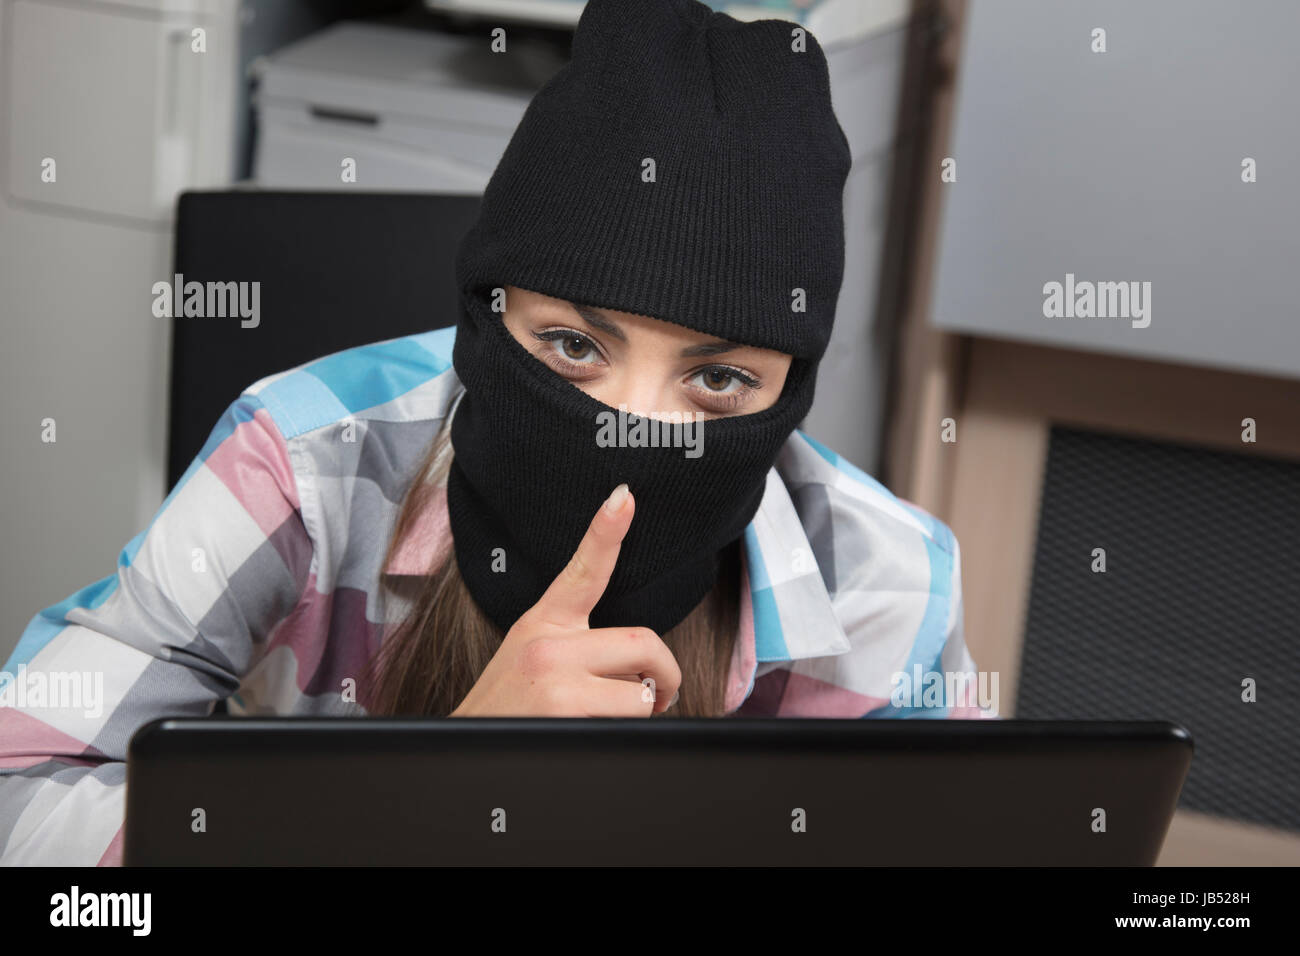 Data thief on computer performs a silent gesture Stock Photo